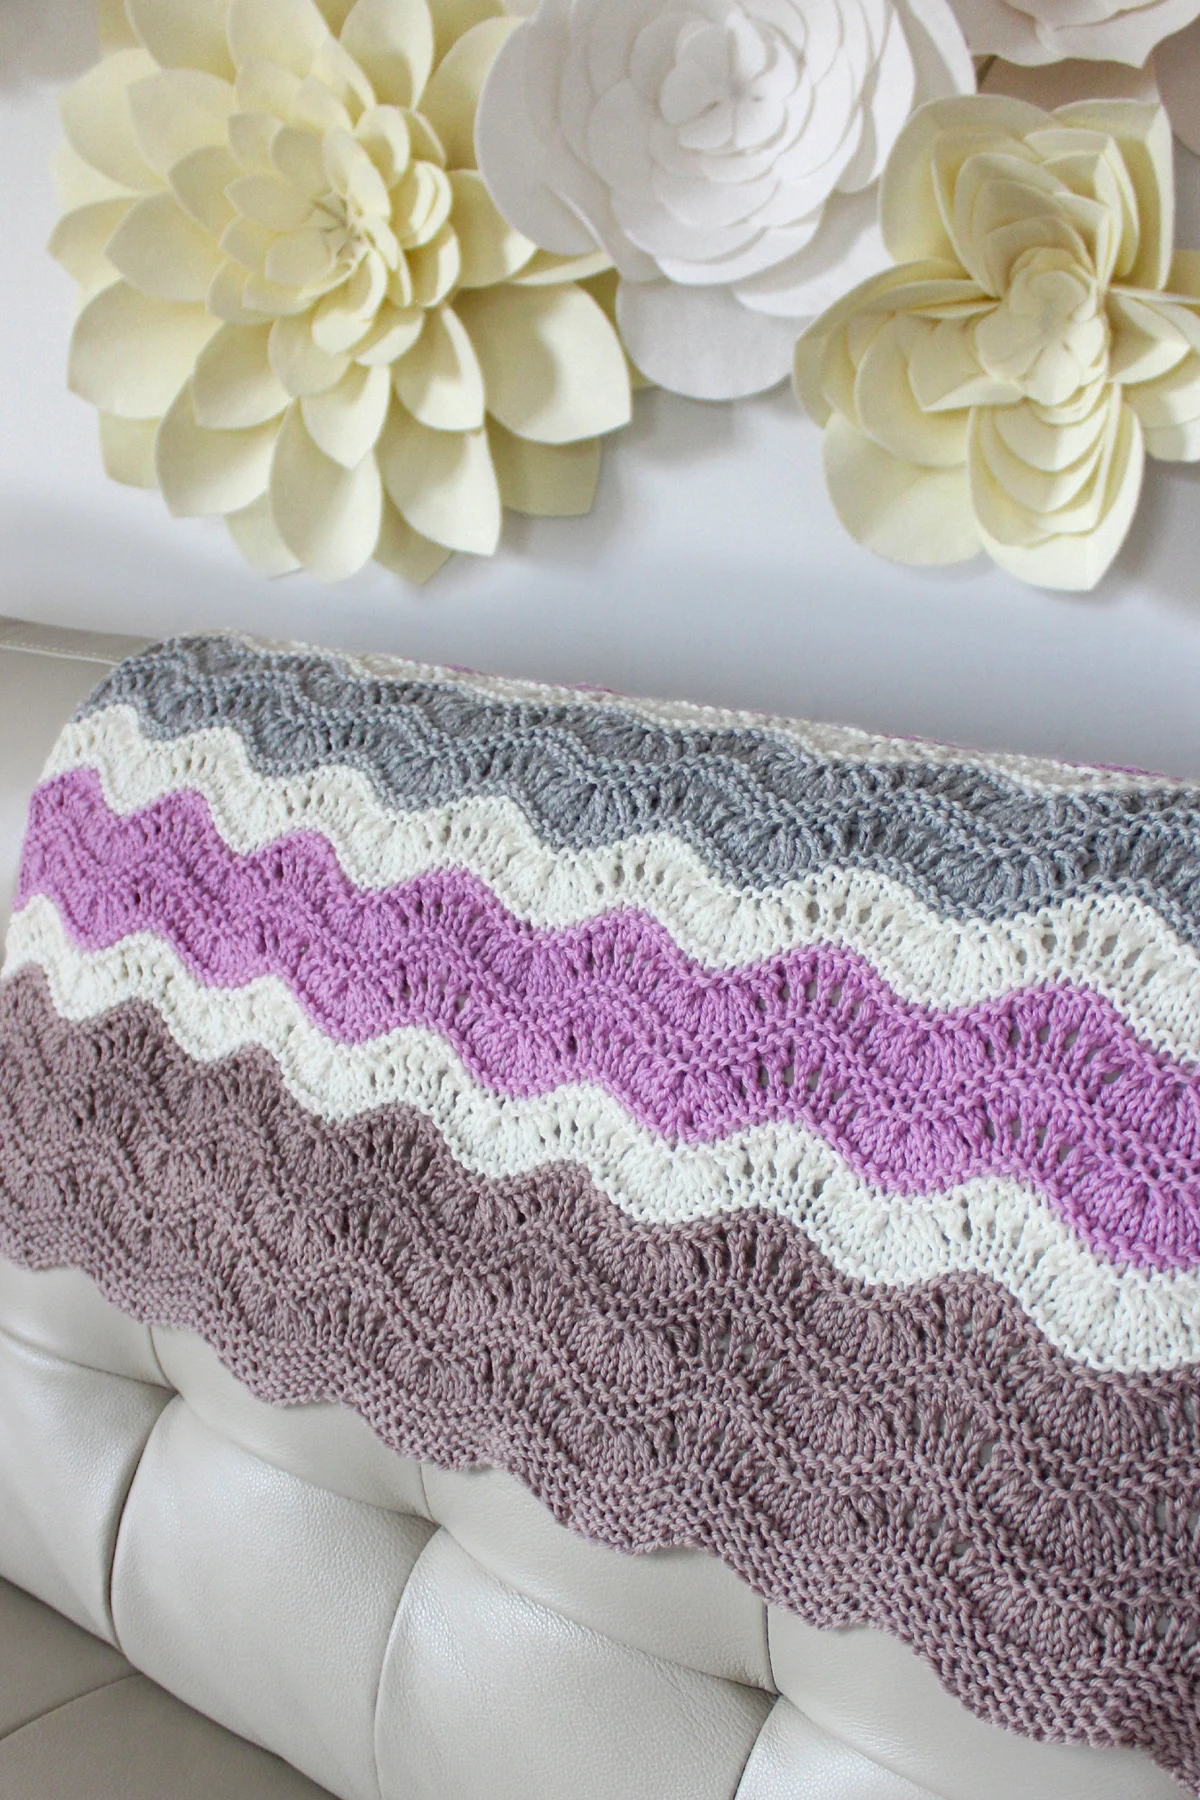 Mavericks Wave Blanket knitted in shades of light purple, brown, grey, and white displayed on a beige leather couch with white felt flowers on the wall.